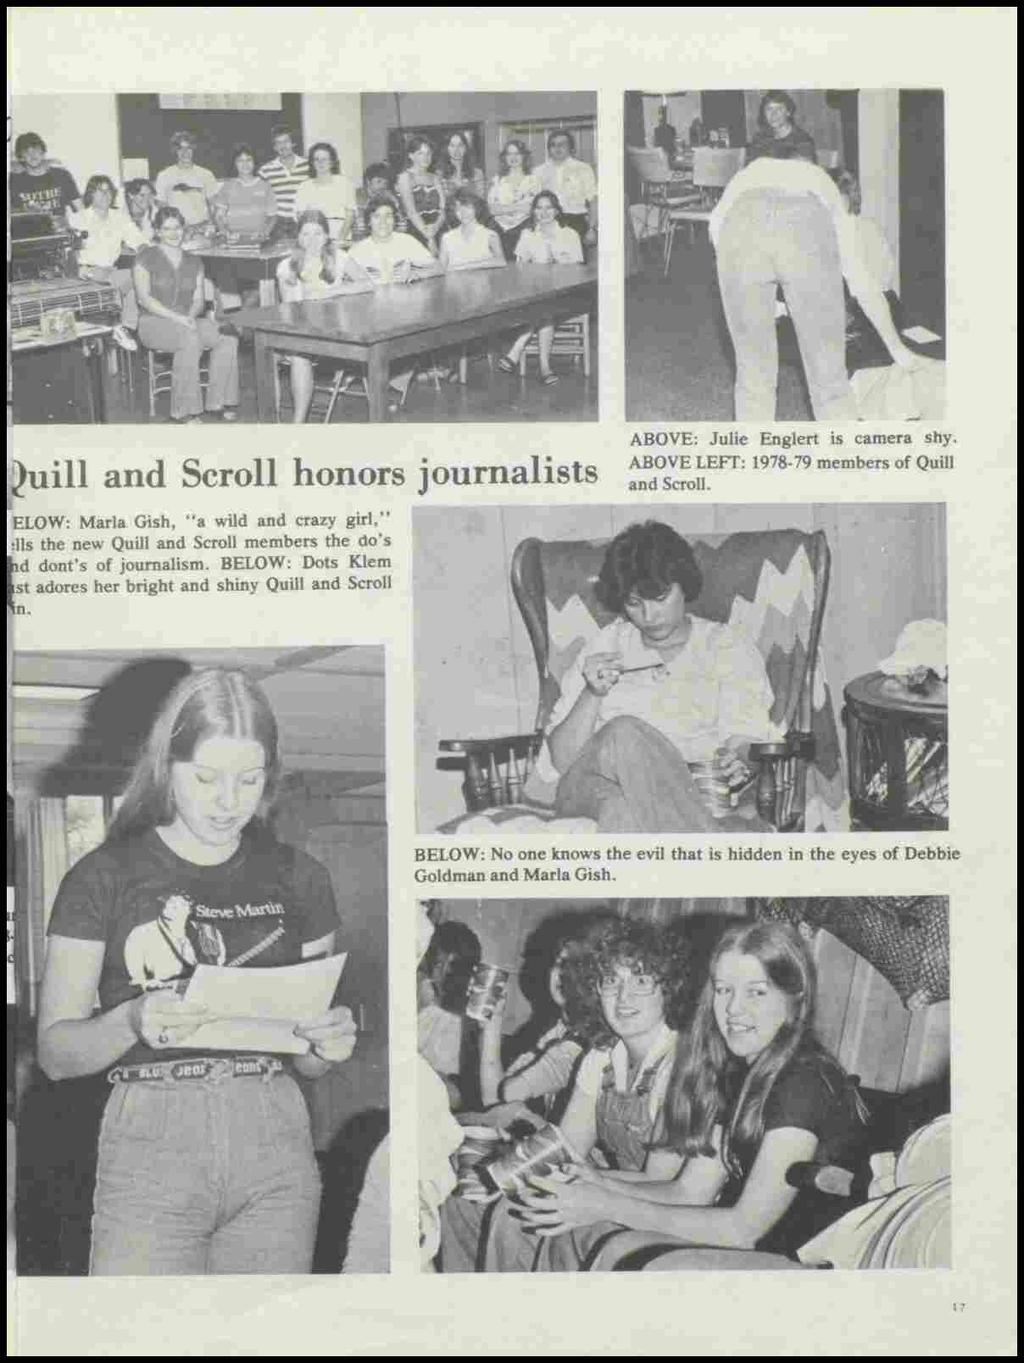 ~uill and Scroll honors journalists ABOVE: Julie Englert is camera shy. ABOVE LEFT: 1978-79 members of Quill and Scroll.